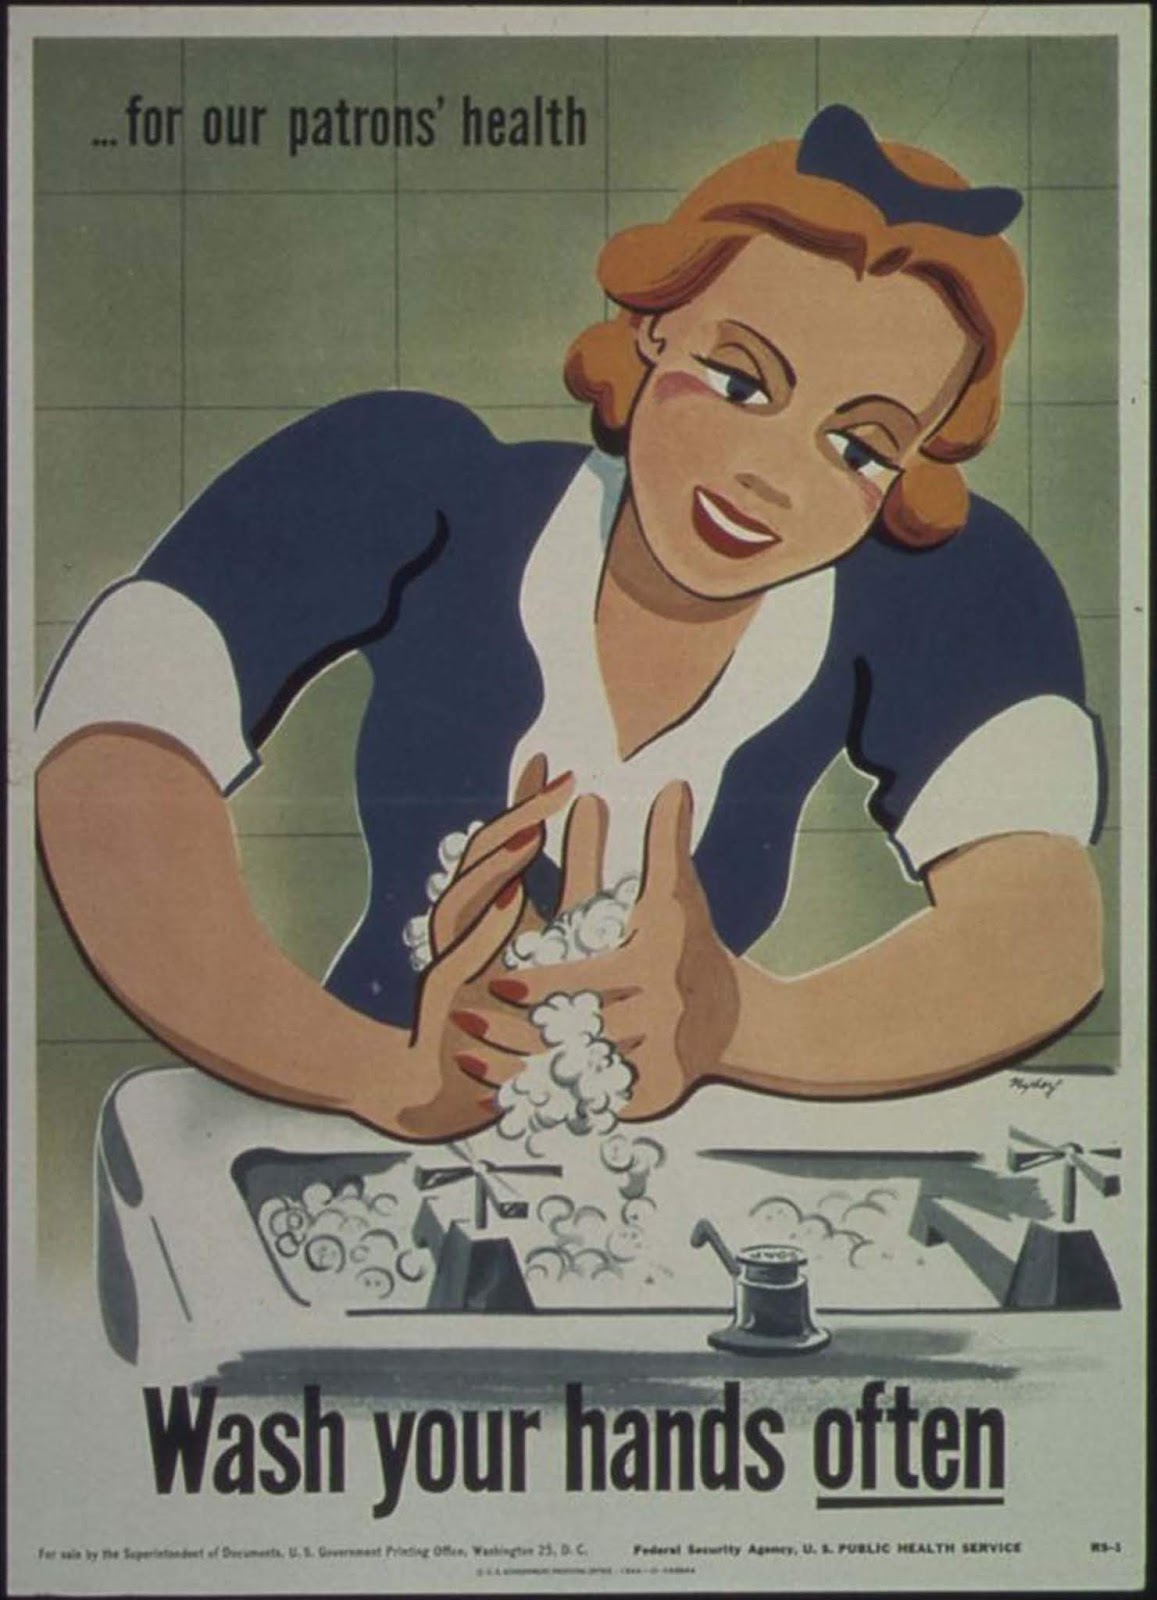  From the USA: “Wash your hands often”